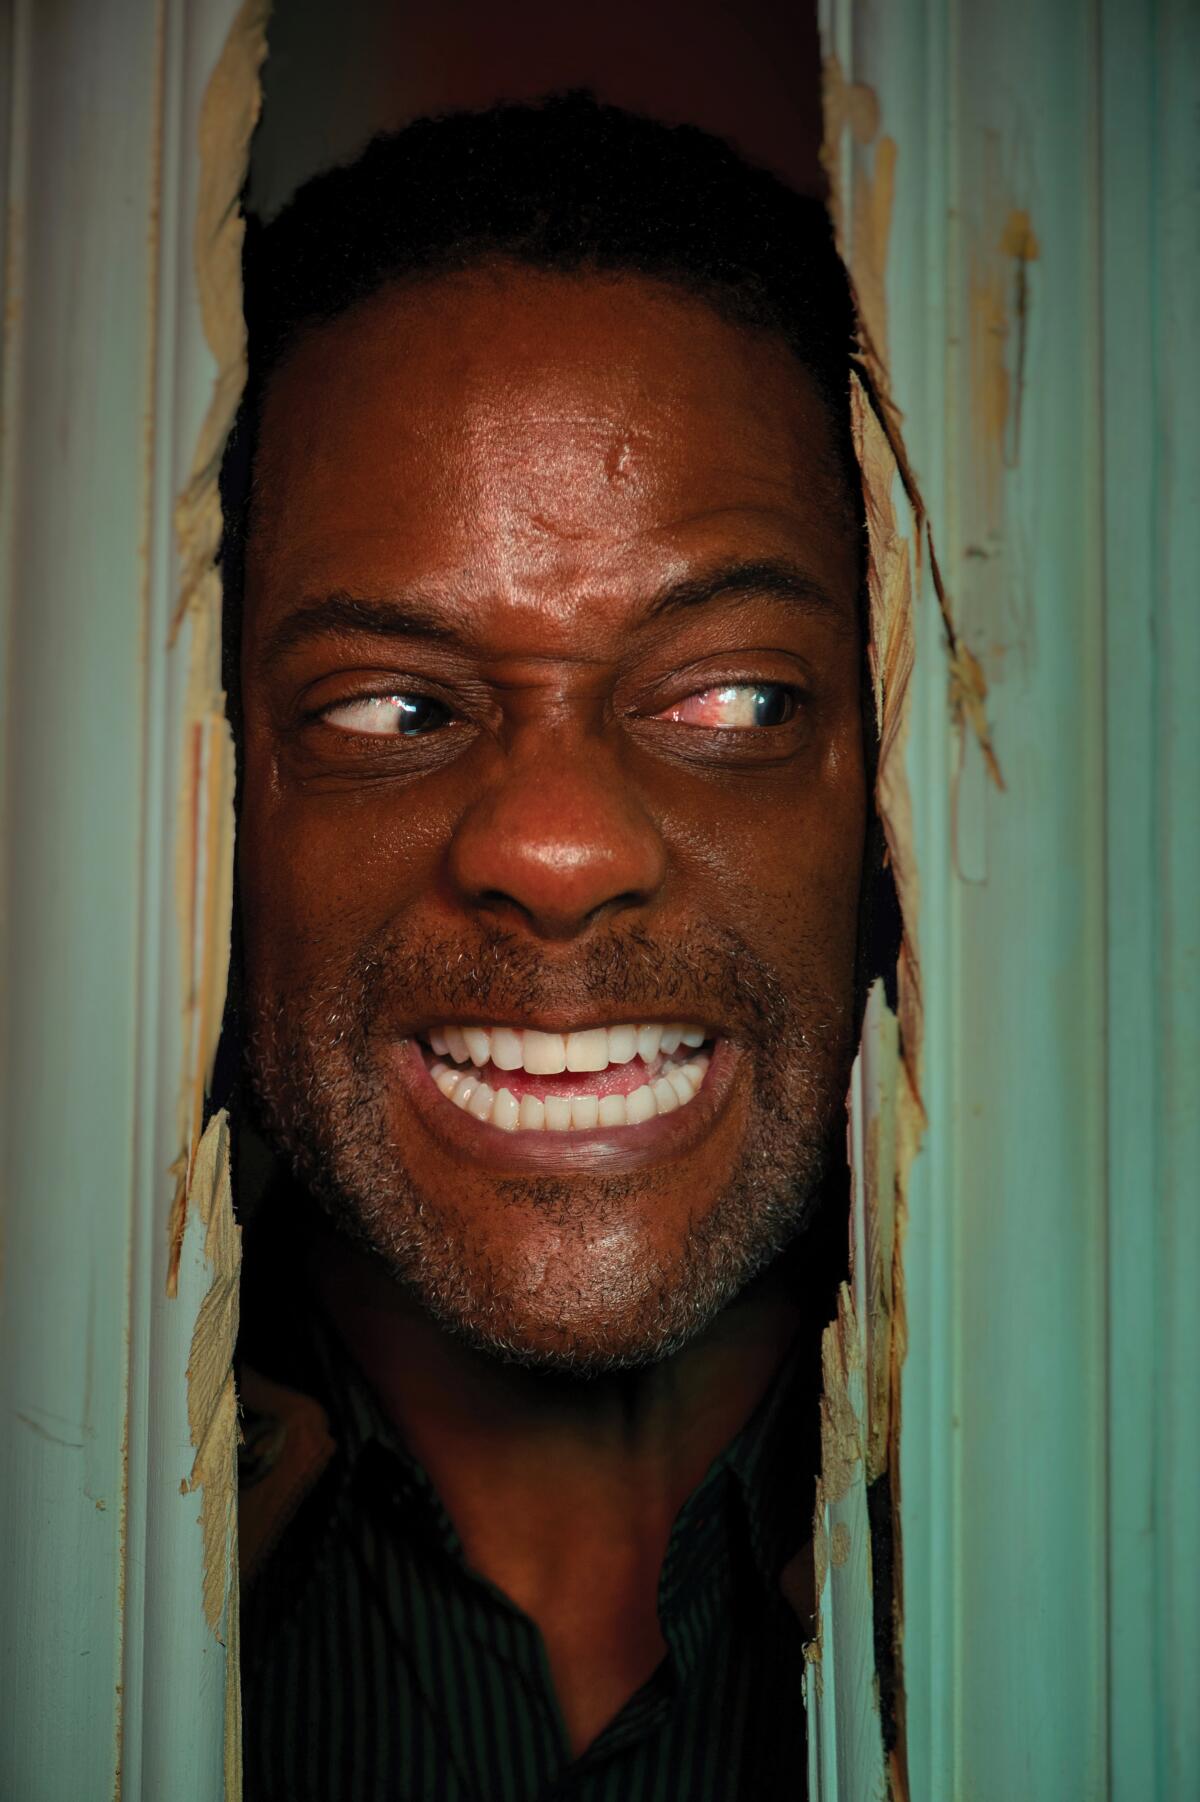 A man snarls as he peers through a hole in a door.